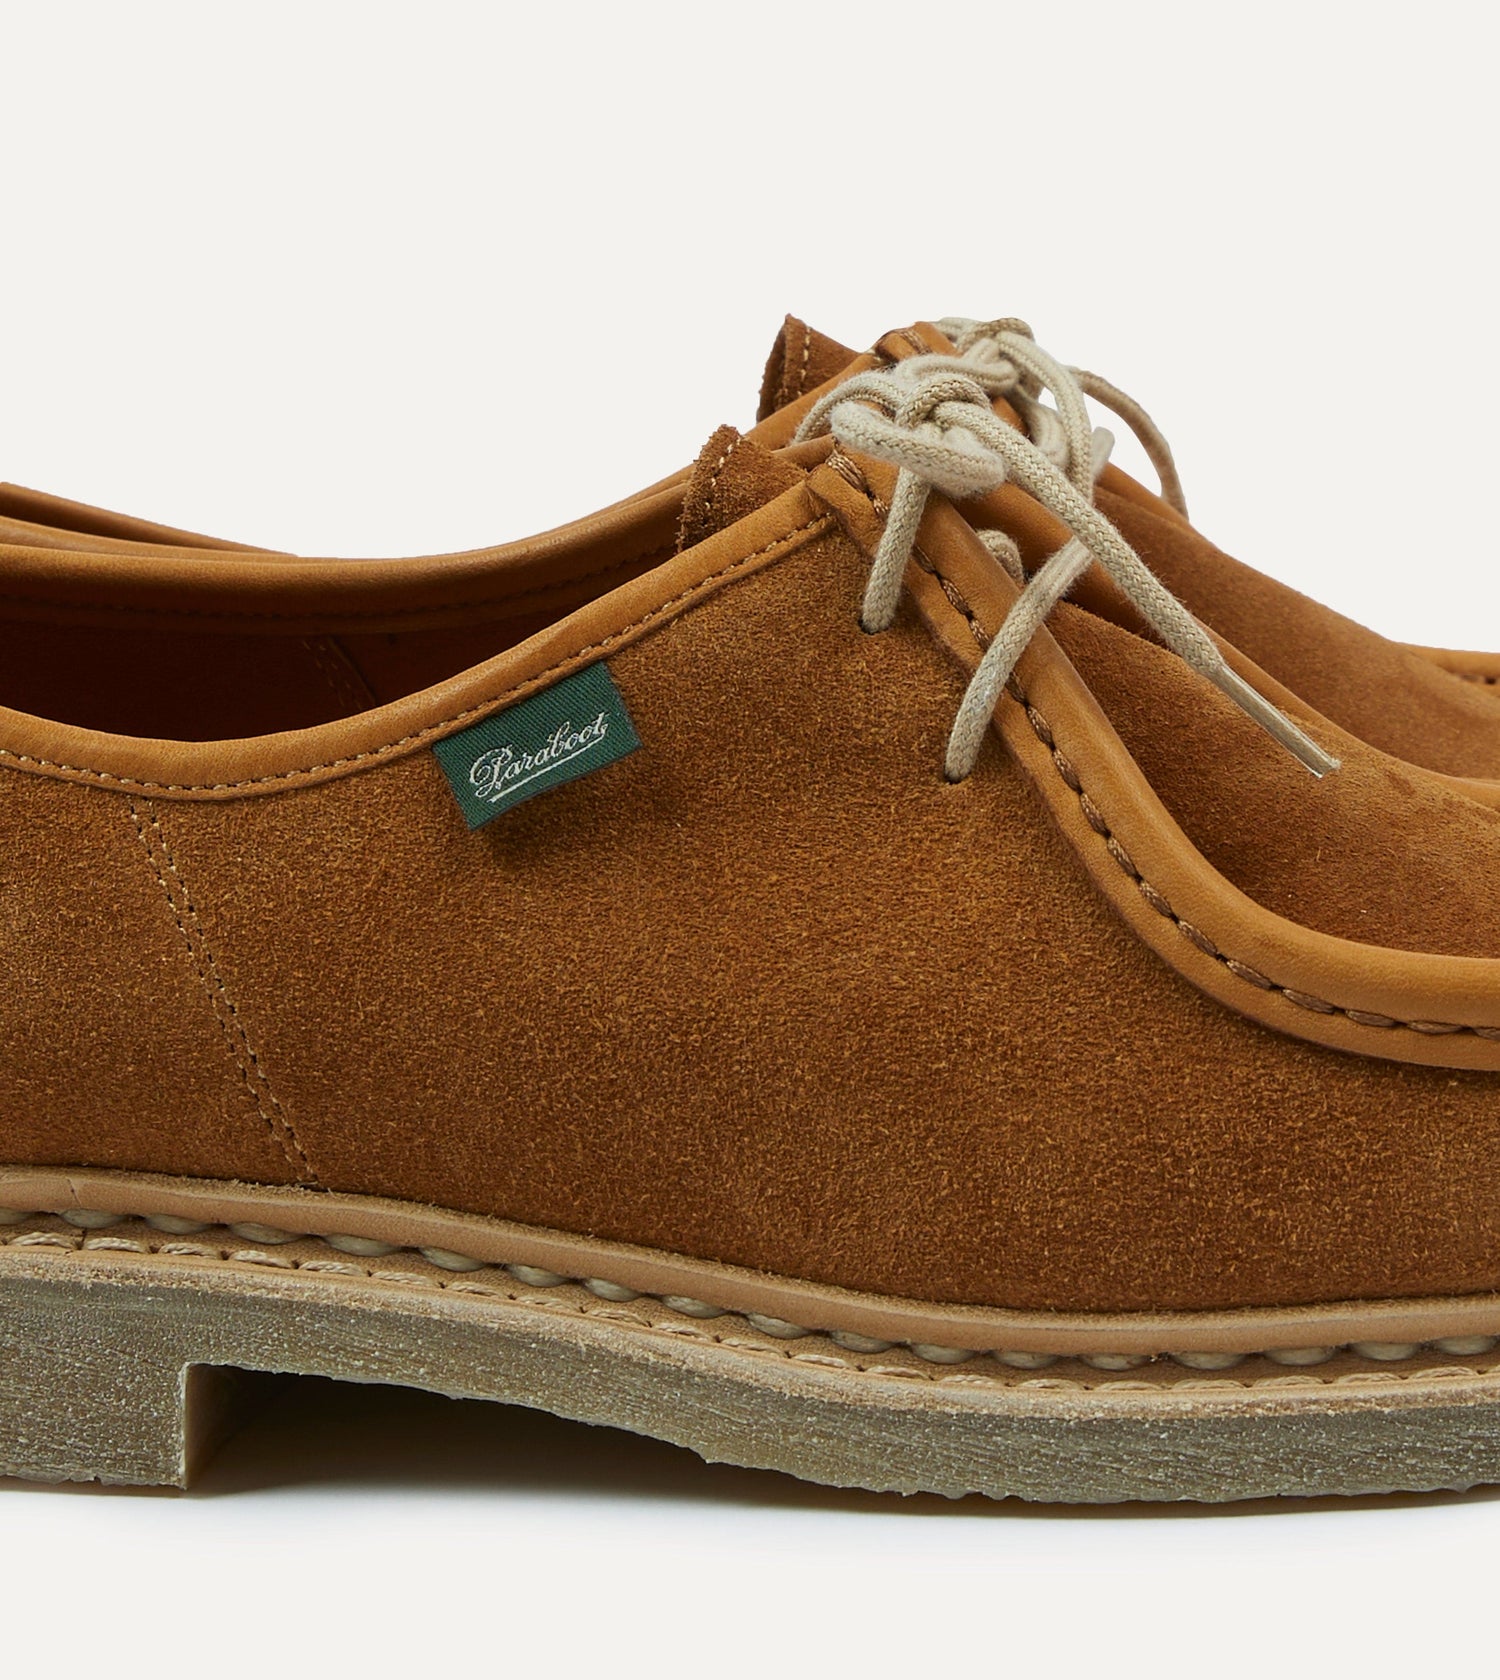 Paraboot Micka Whiskey Suede Derby Shoe